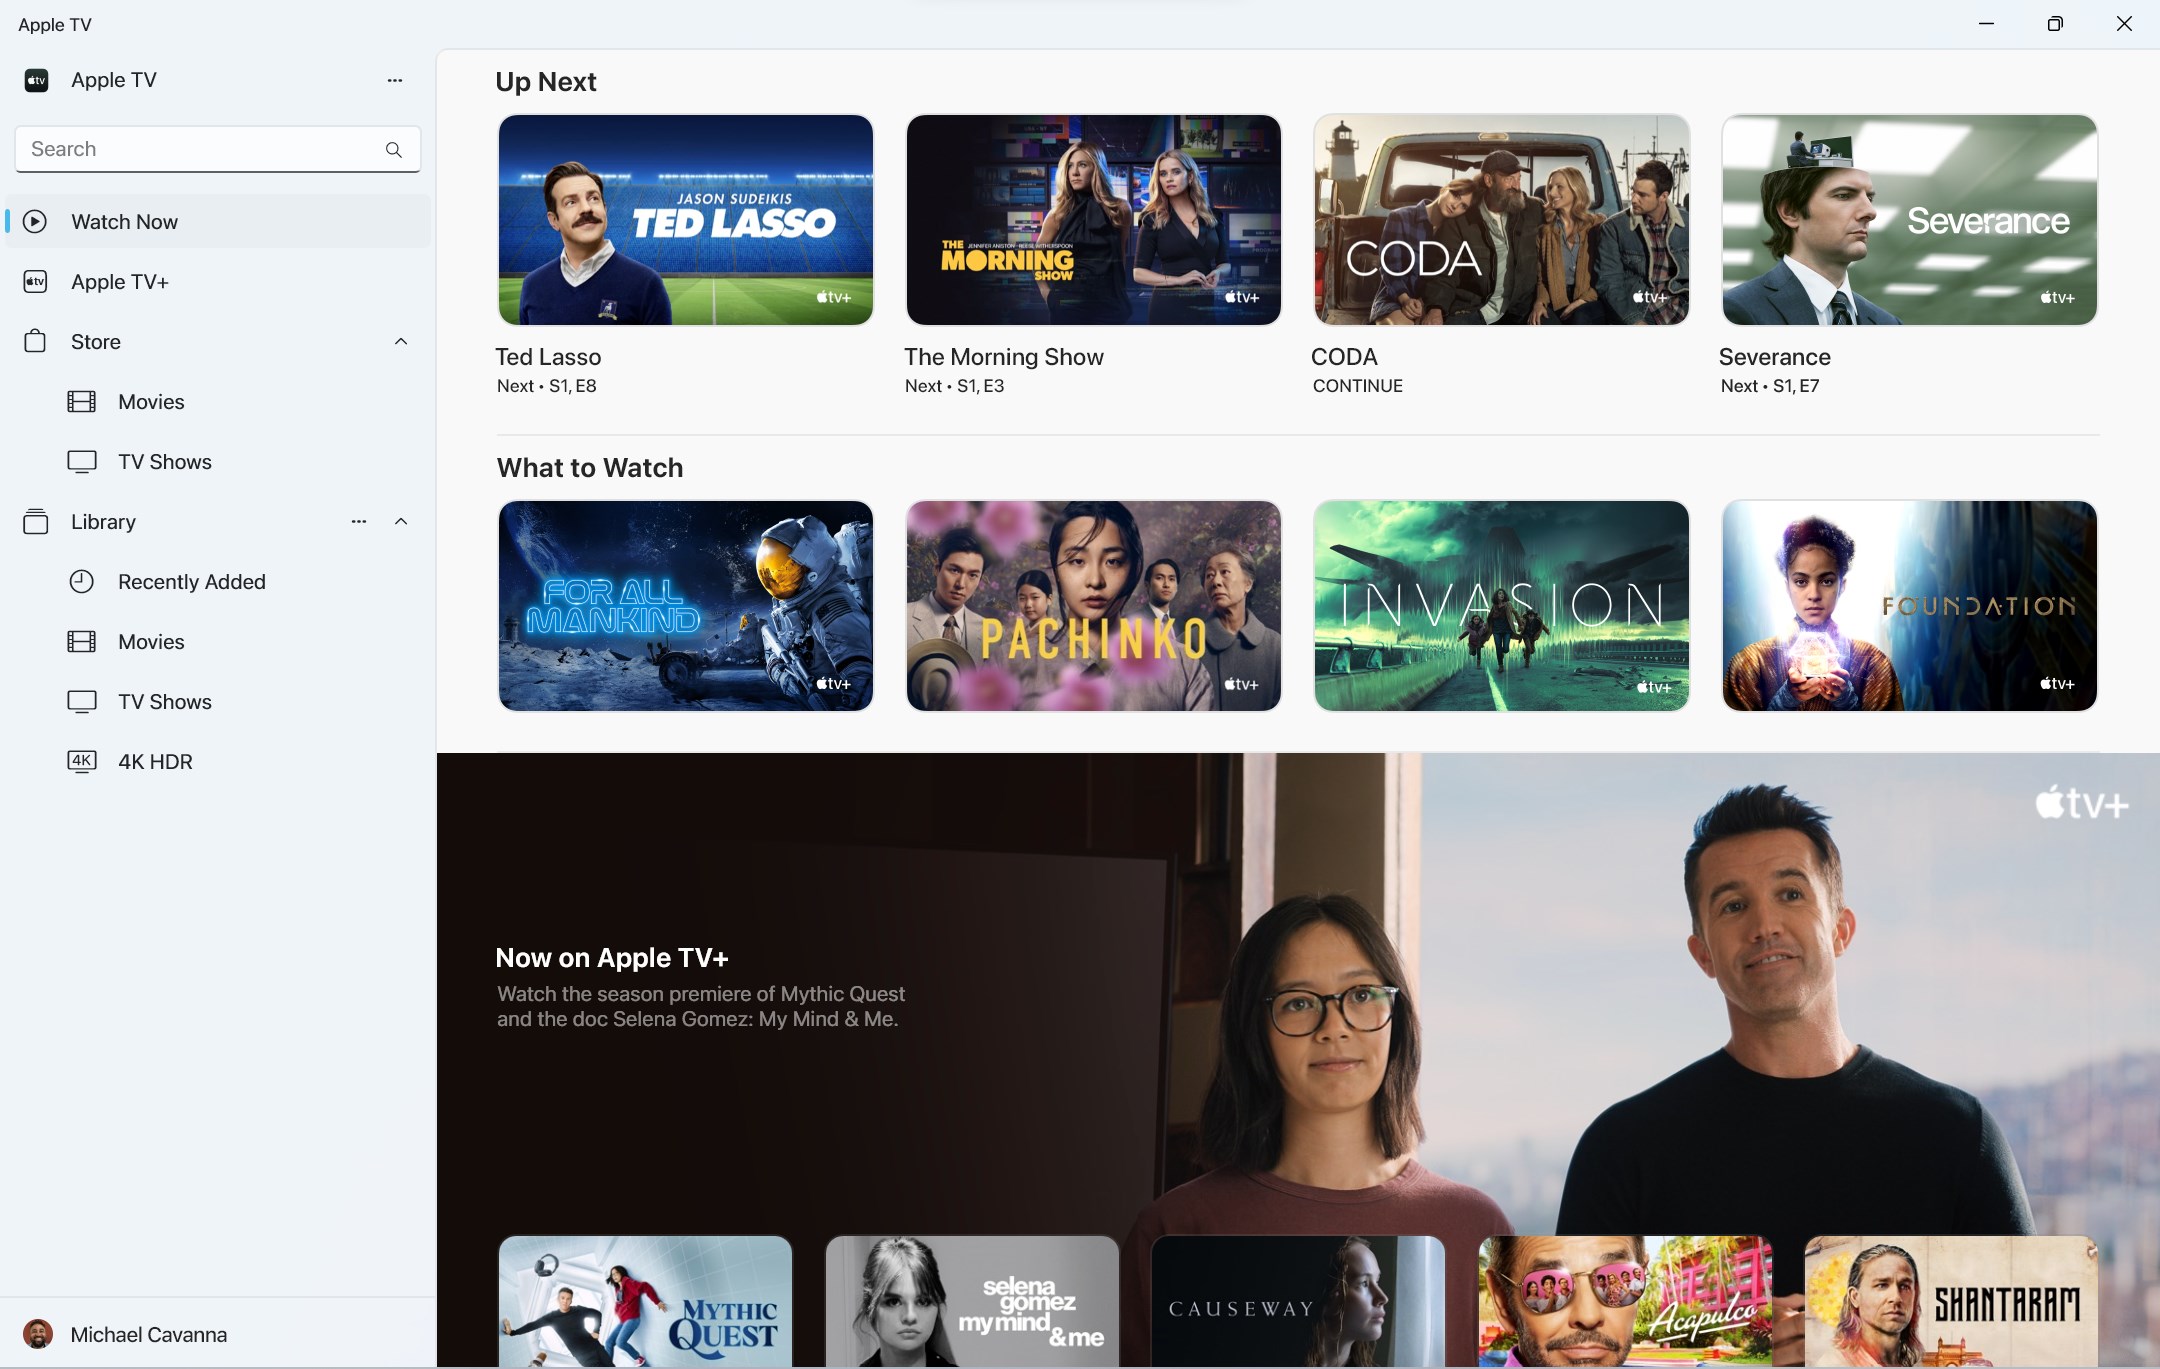 The Apple TV app for Windows showcasing the Watch Now section